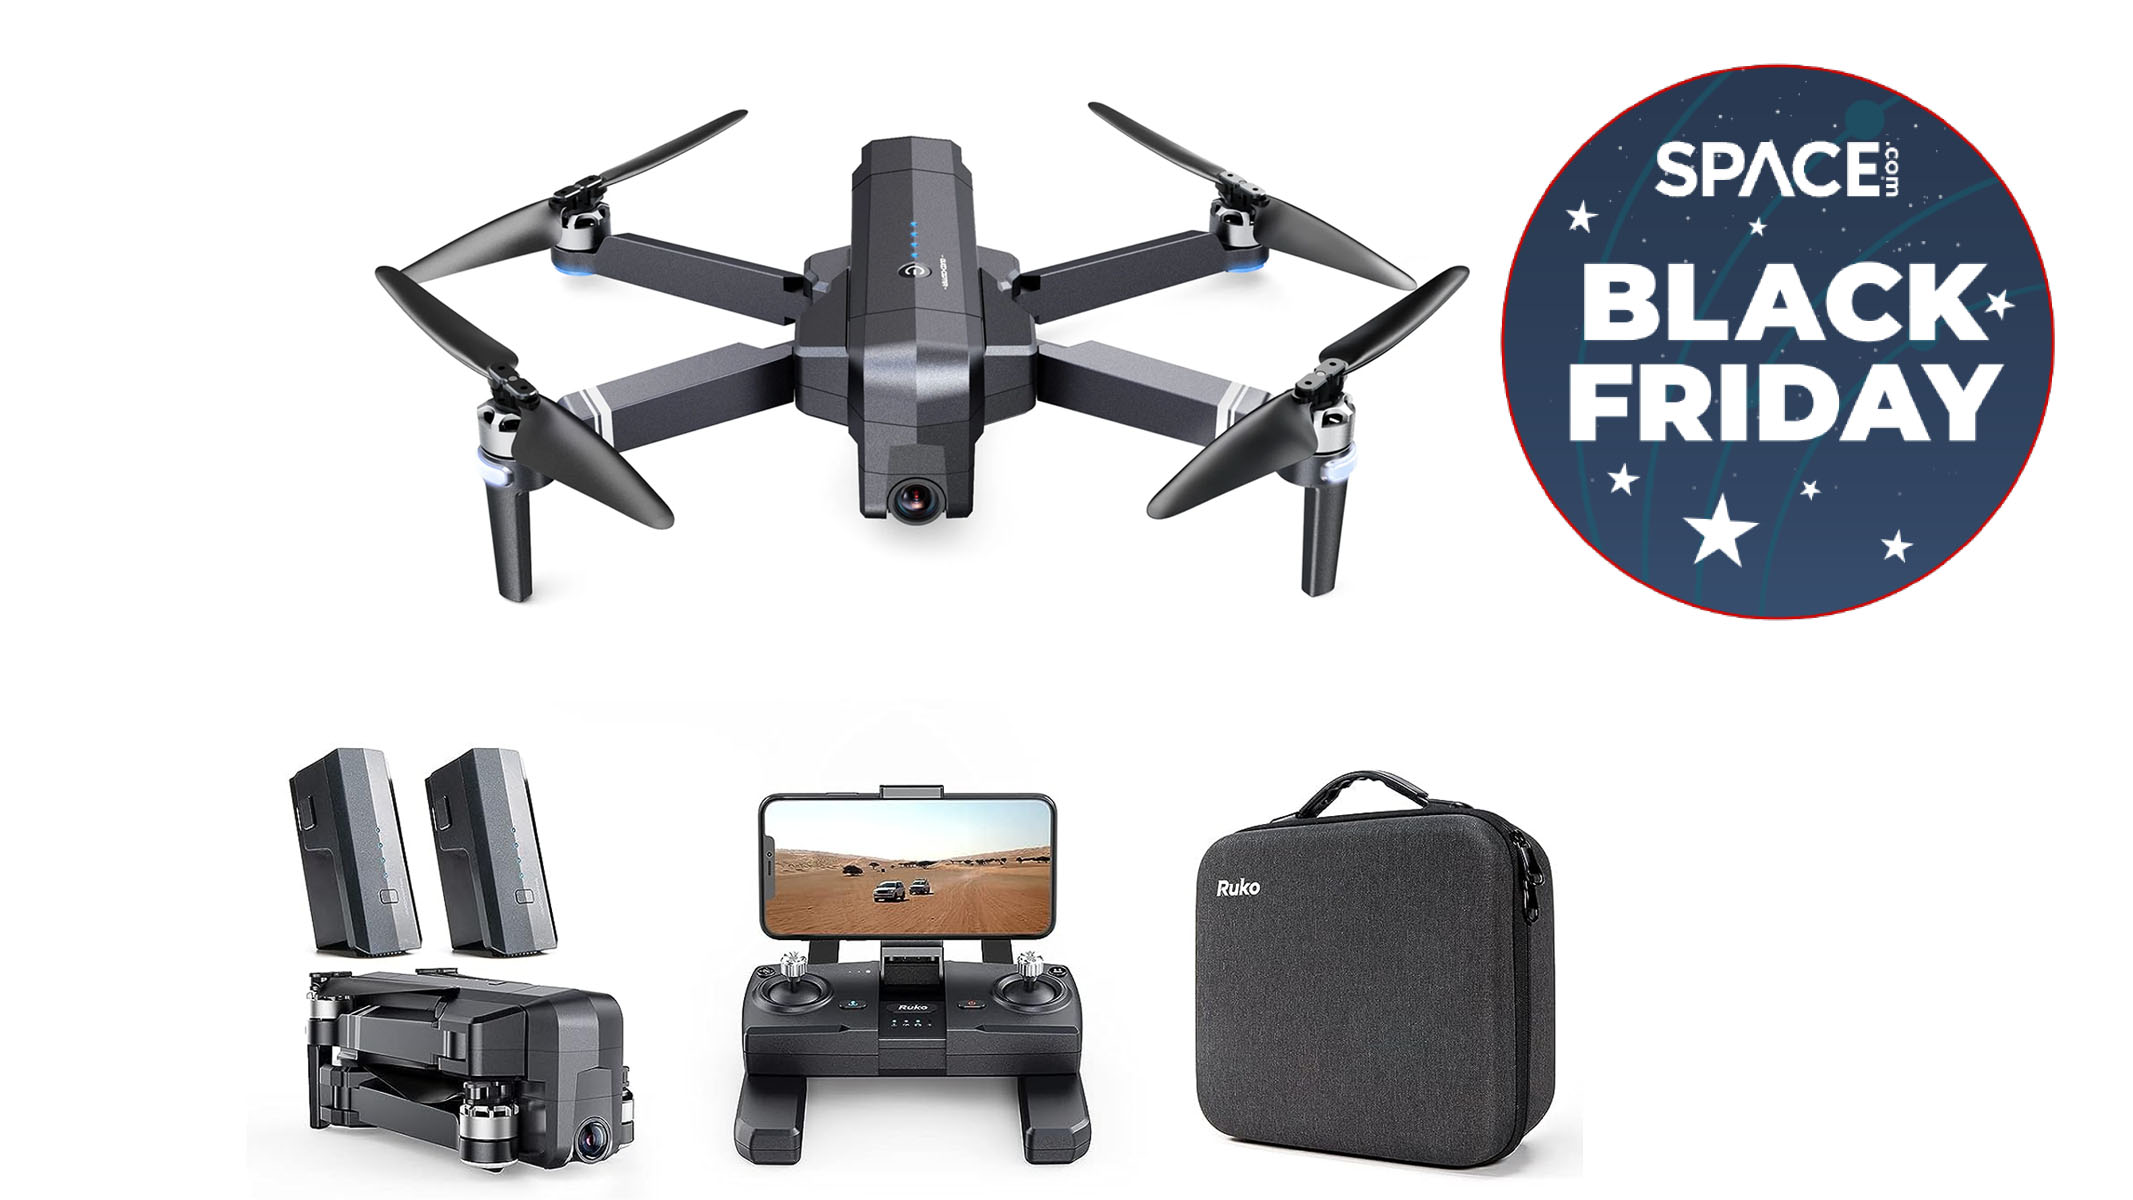 Black Friday drone deal: Save up to $240 on this Ruko F11Pro drone Space